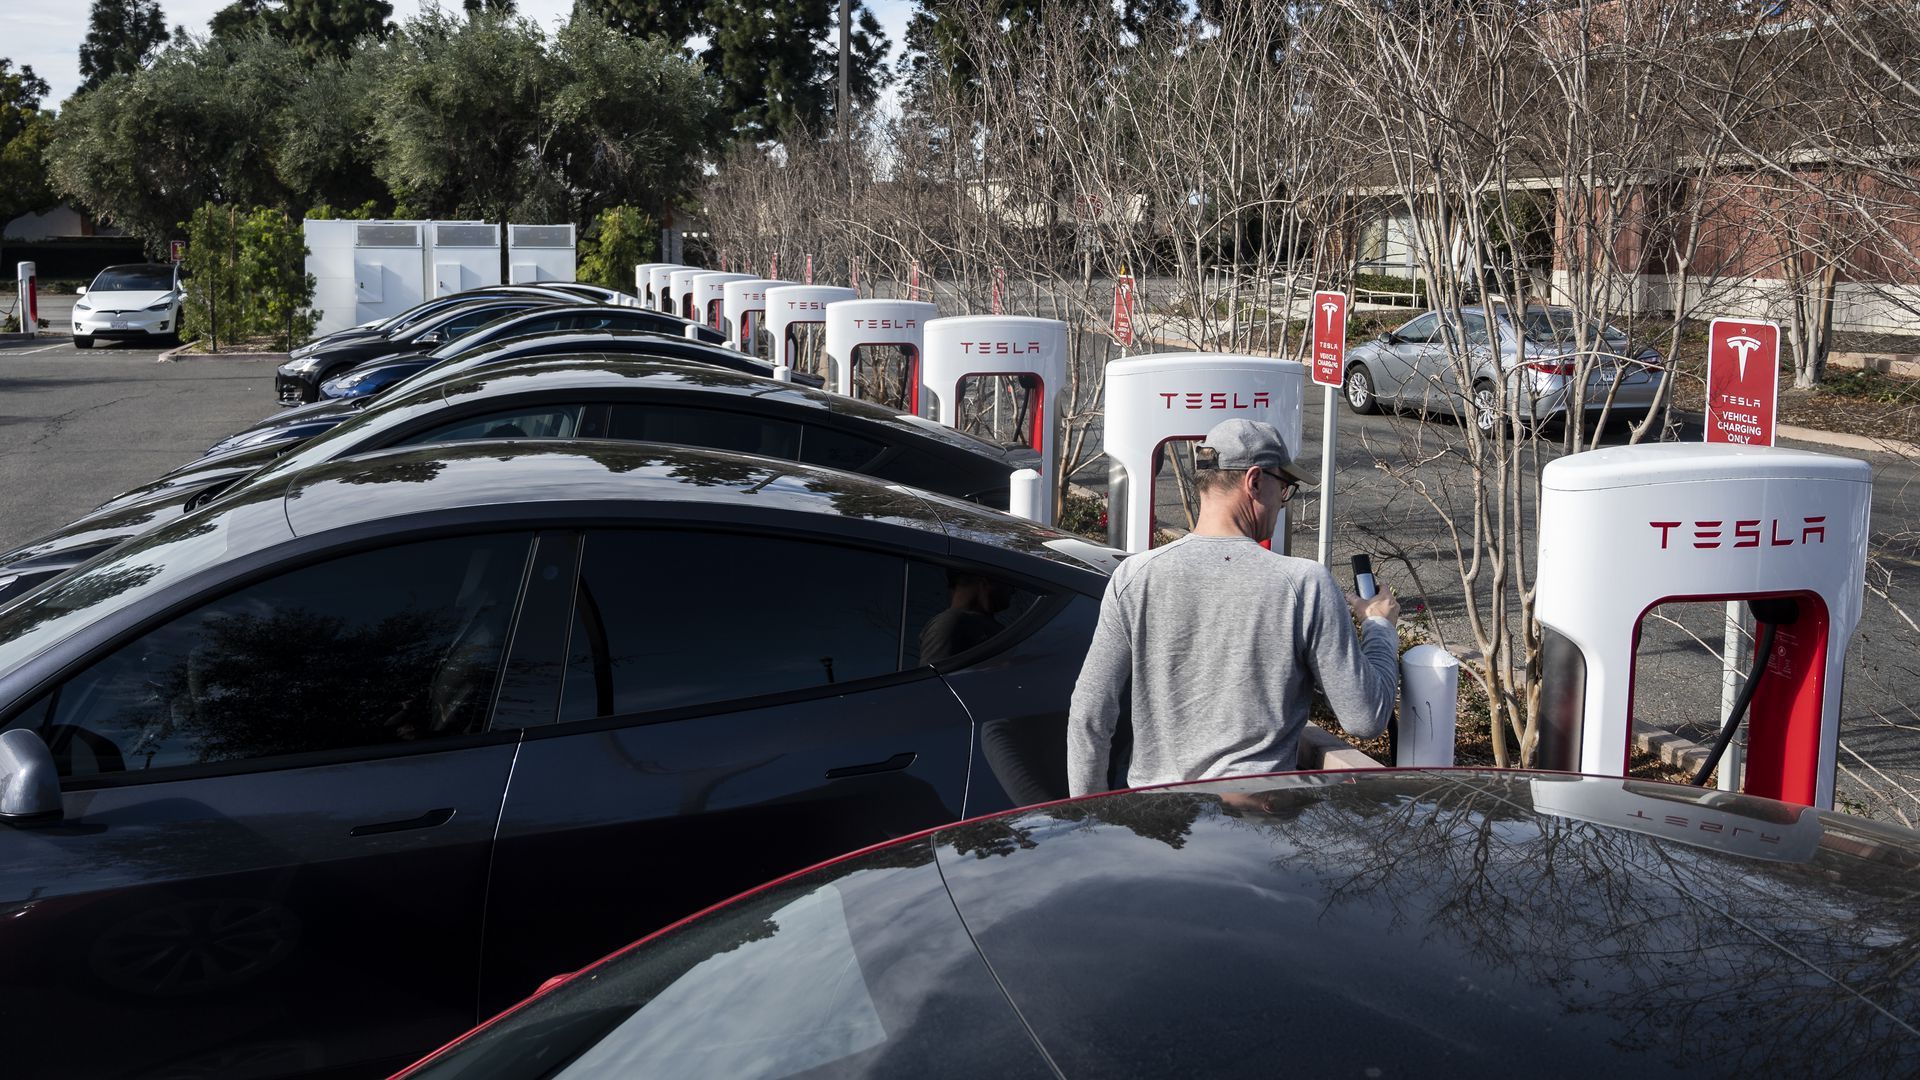 Tesla cars lined up at charging stations.